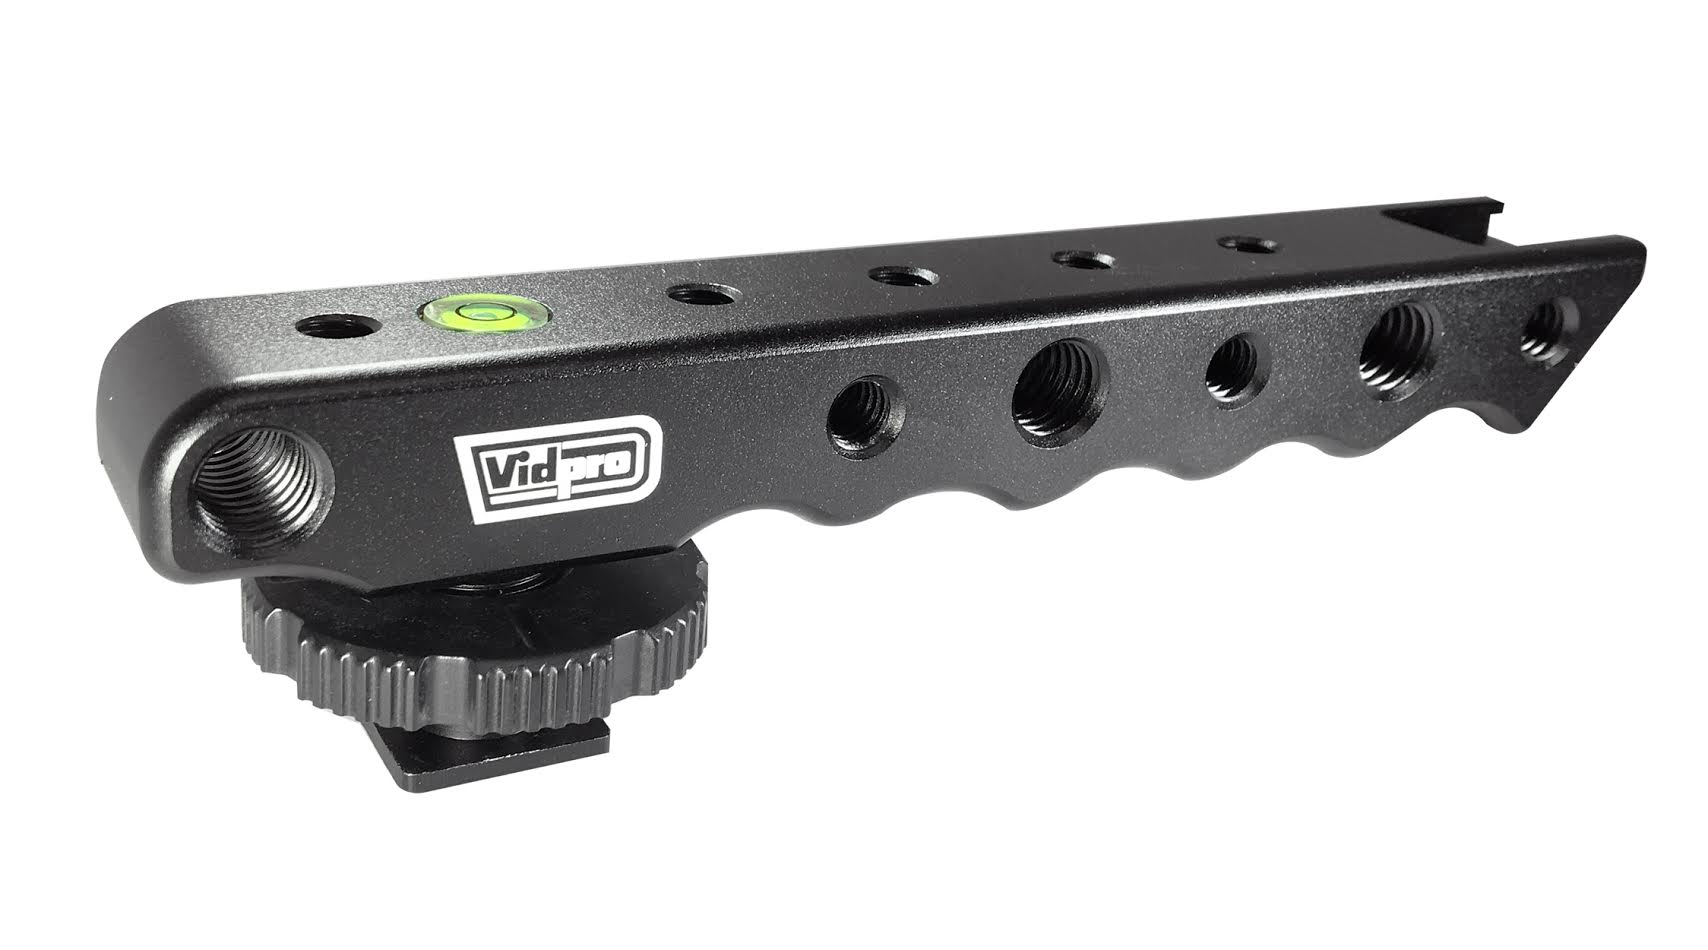 Video Stabilizers for ColemanCamcorder